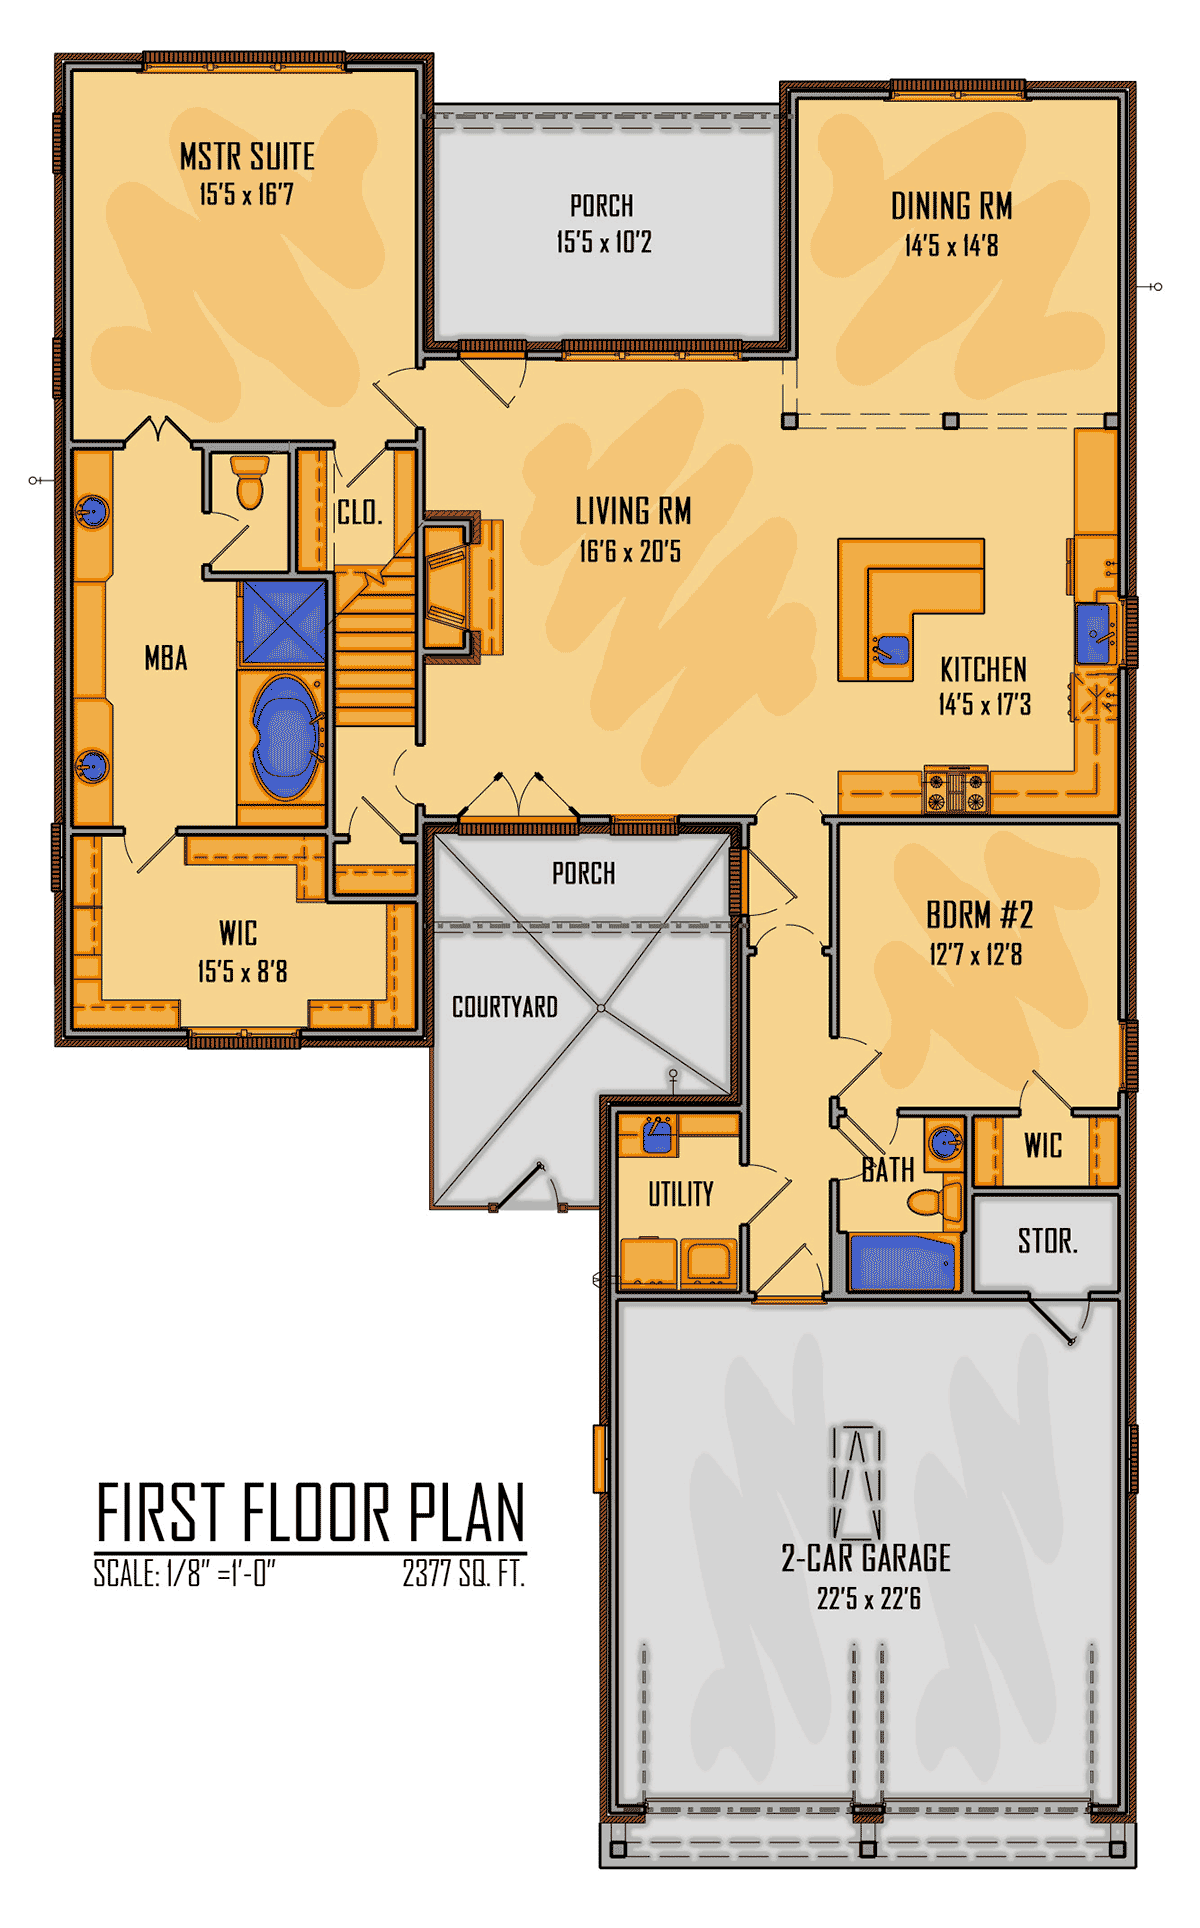 European, Southern, Southwest, Traditional House Plan 41678 with 3 Beds, 3 Baths, 2 Car Garage Level One